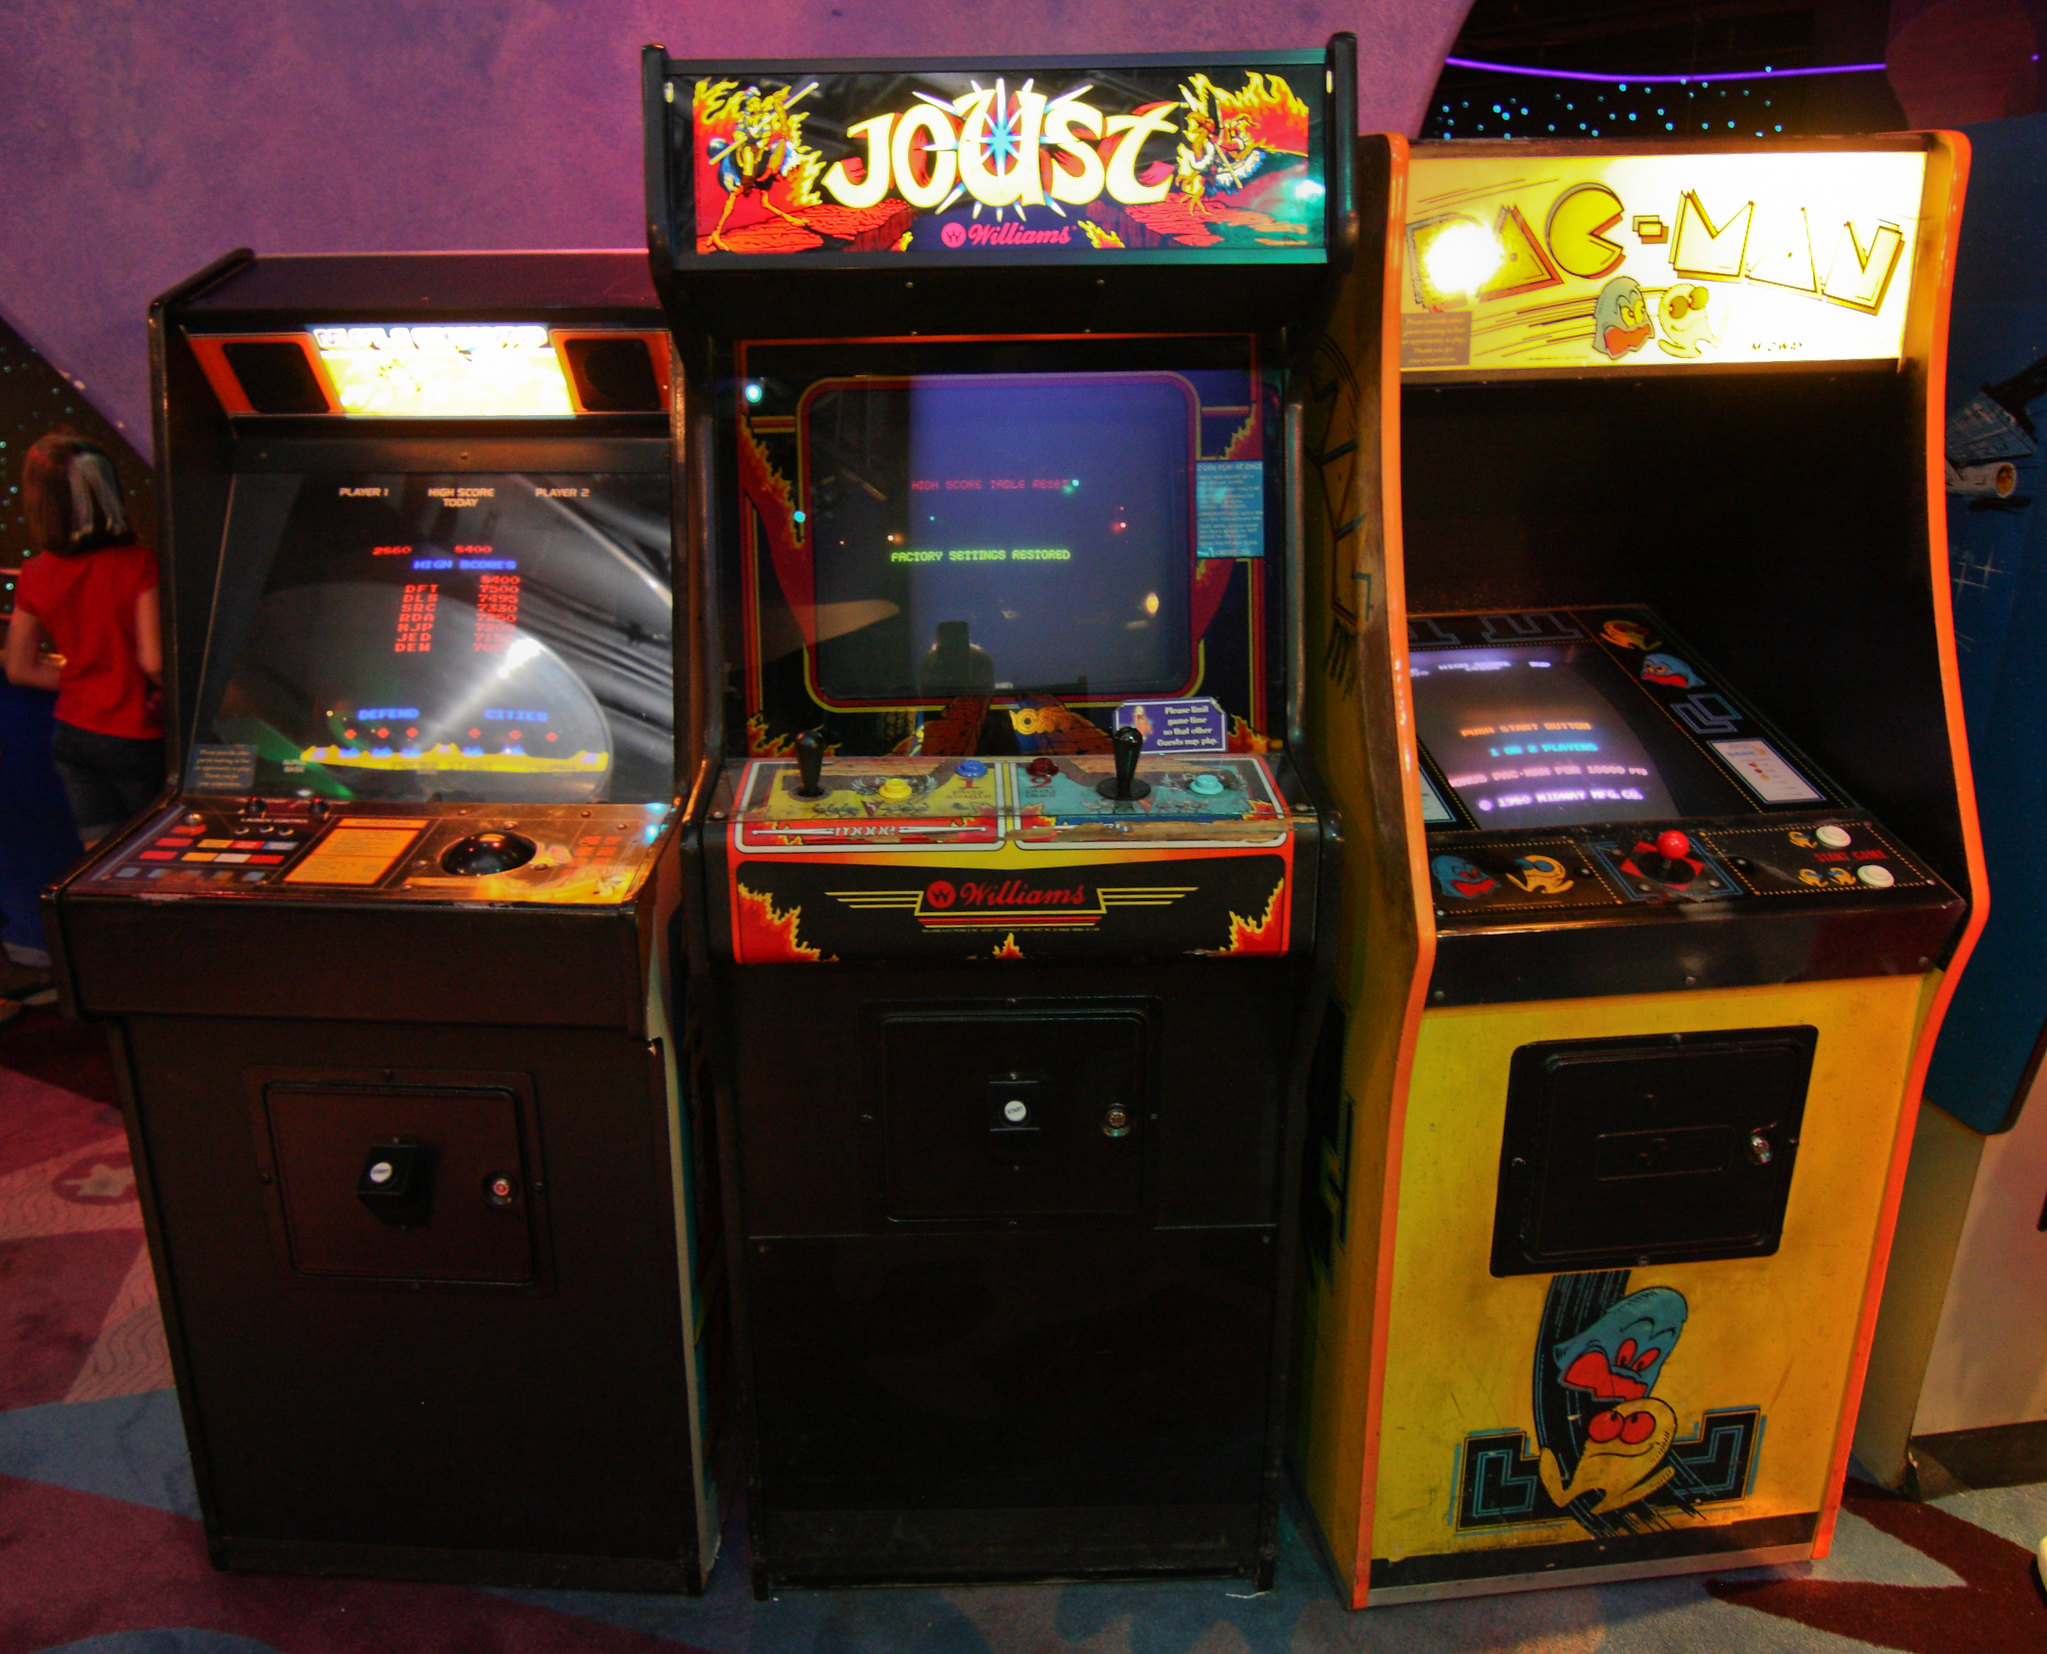 Joust and Pac Man Arcade Games next to each other